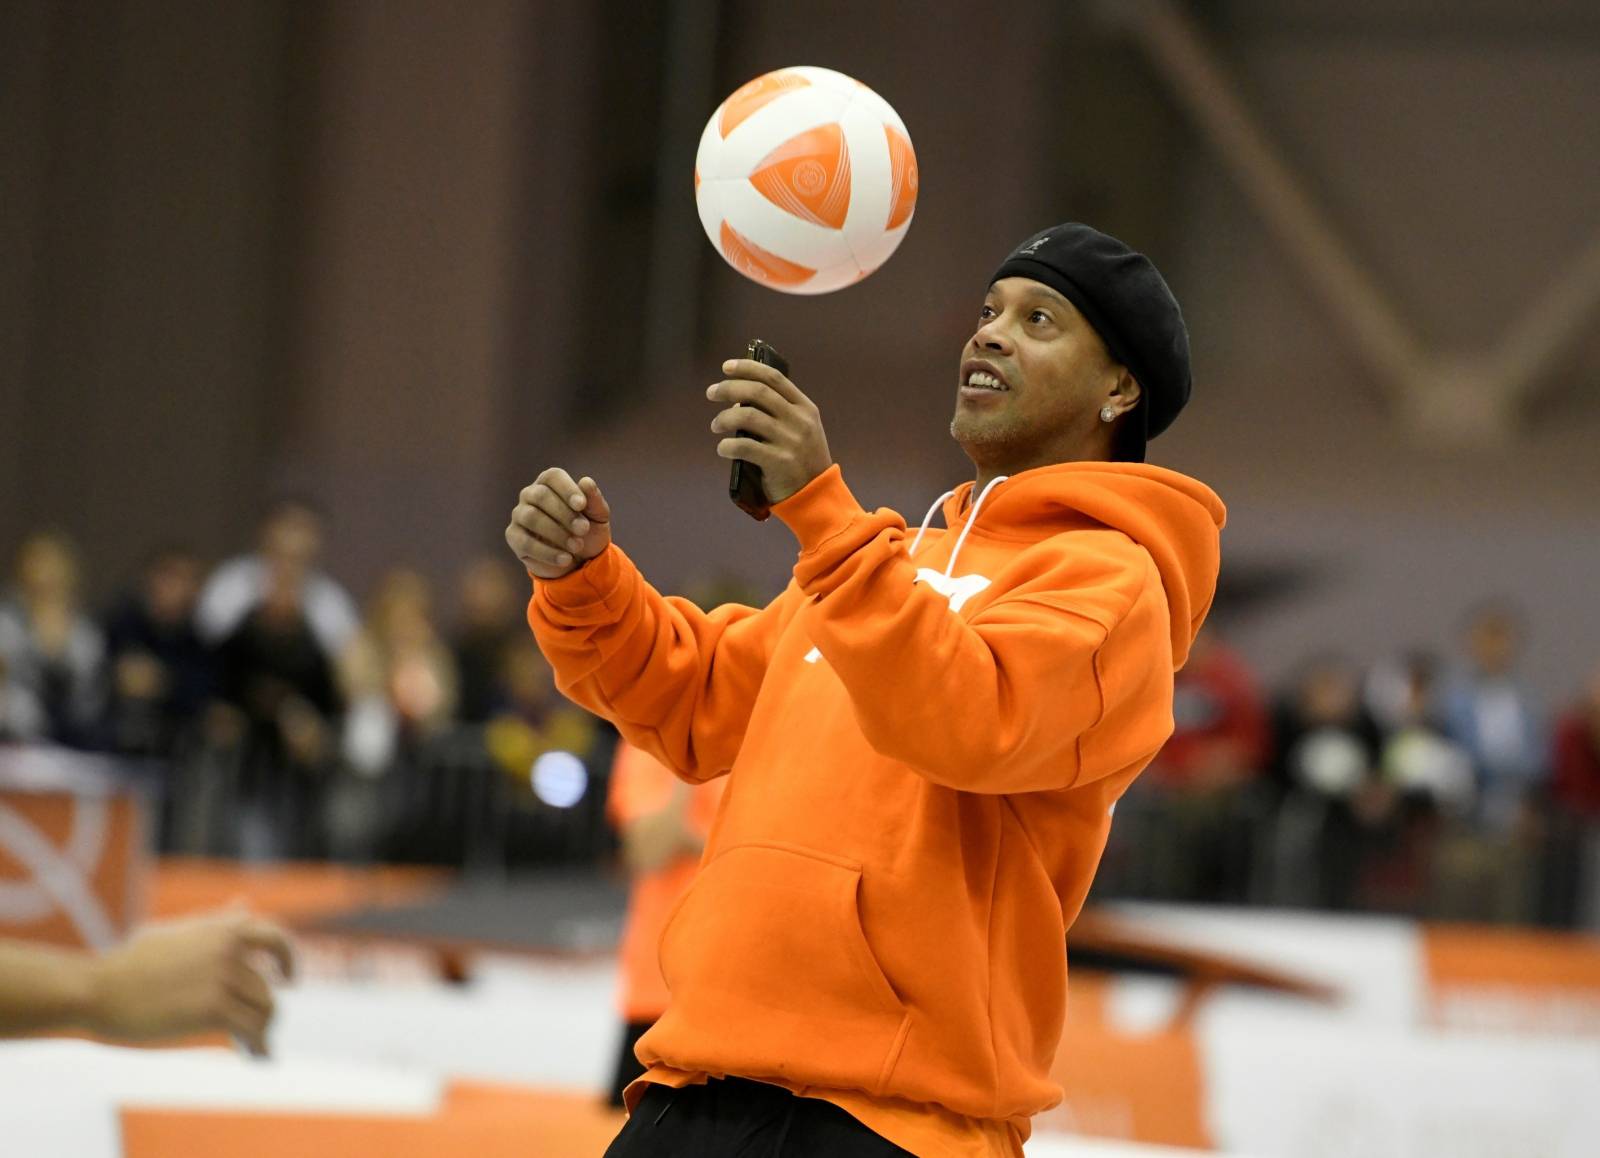 Former FIFA player of the year and football World Cup winner Ronaldinho of Brazil plays Teqball at the Teqball World Championships in Budapest